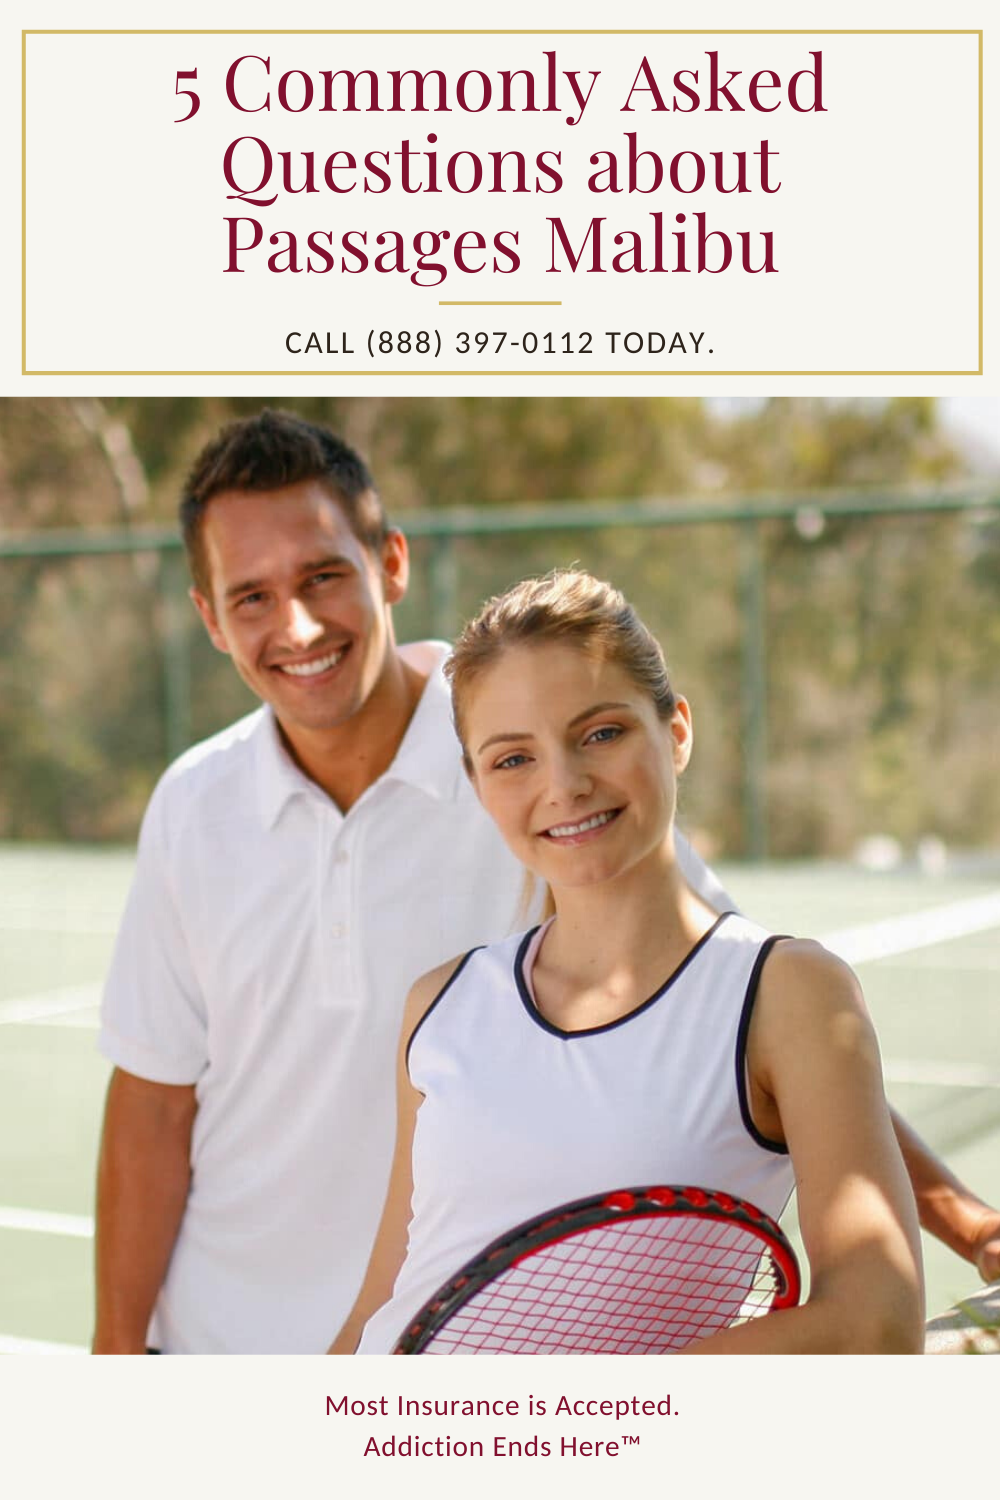 5 Commonly Asked Questions about Passages Malibu